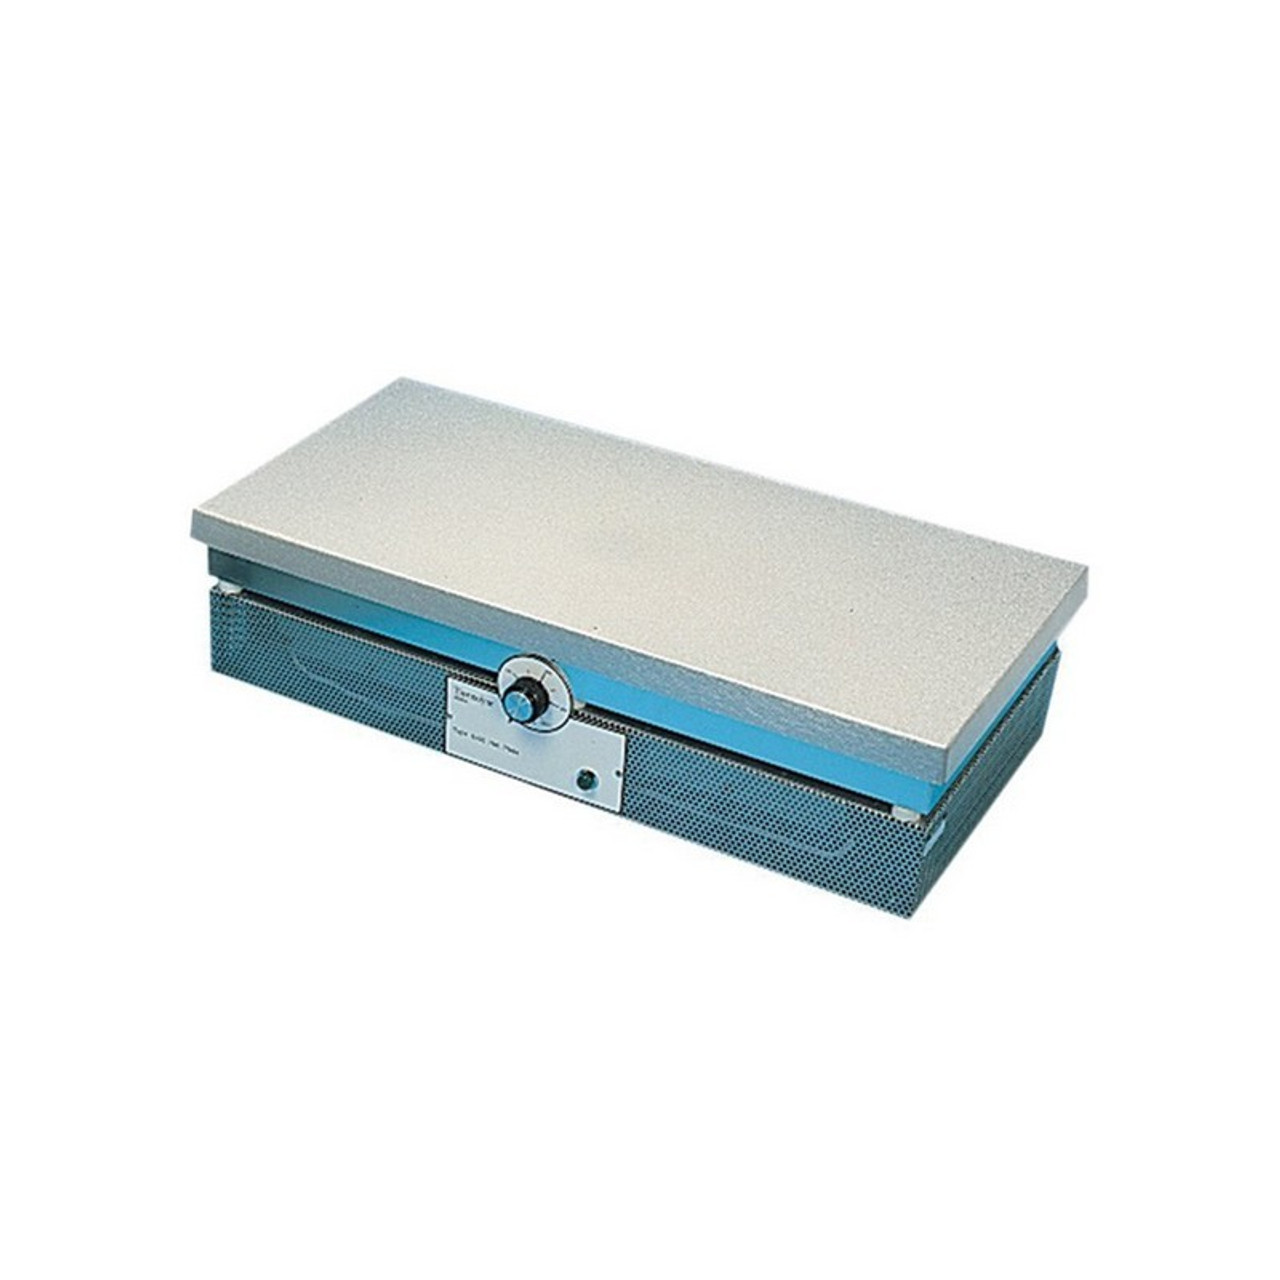 https://cdn11.bigcommerce.com/s-48gxyyxkag/images/stencil/1280x1280/products/20864/54039/hpa2245mq_large_aluminum_top_hotplate__99711.1660332144.jpg?c=1